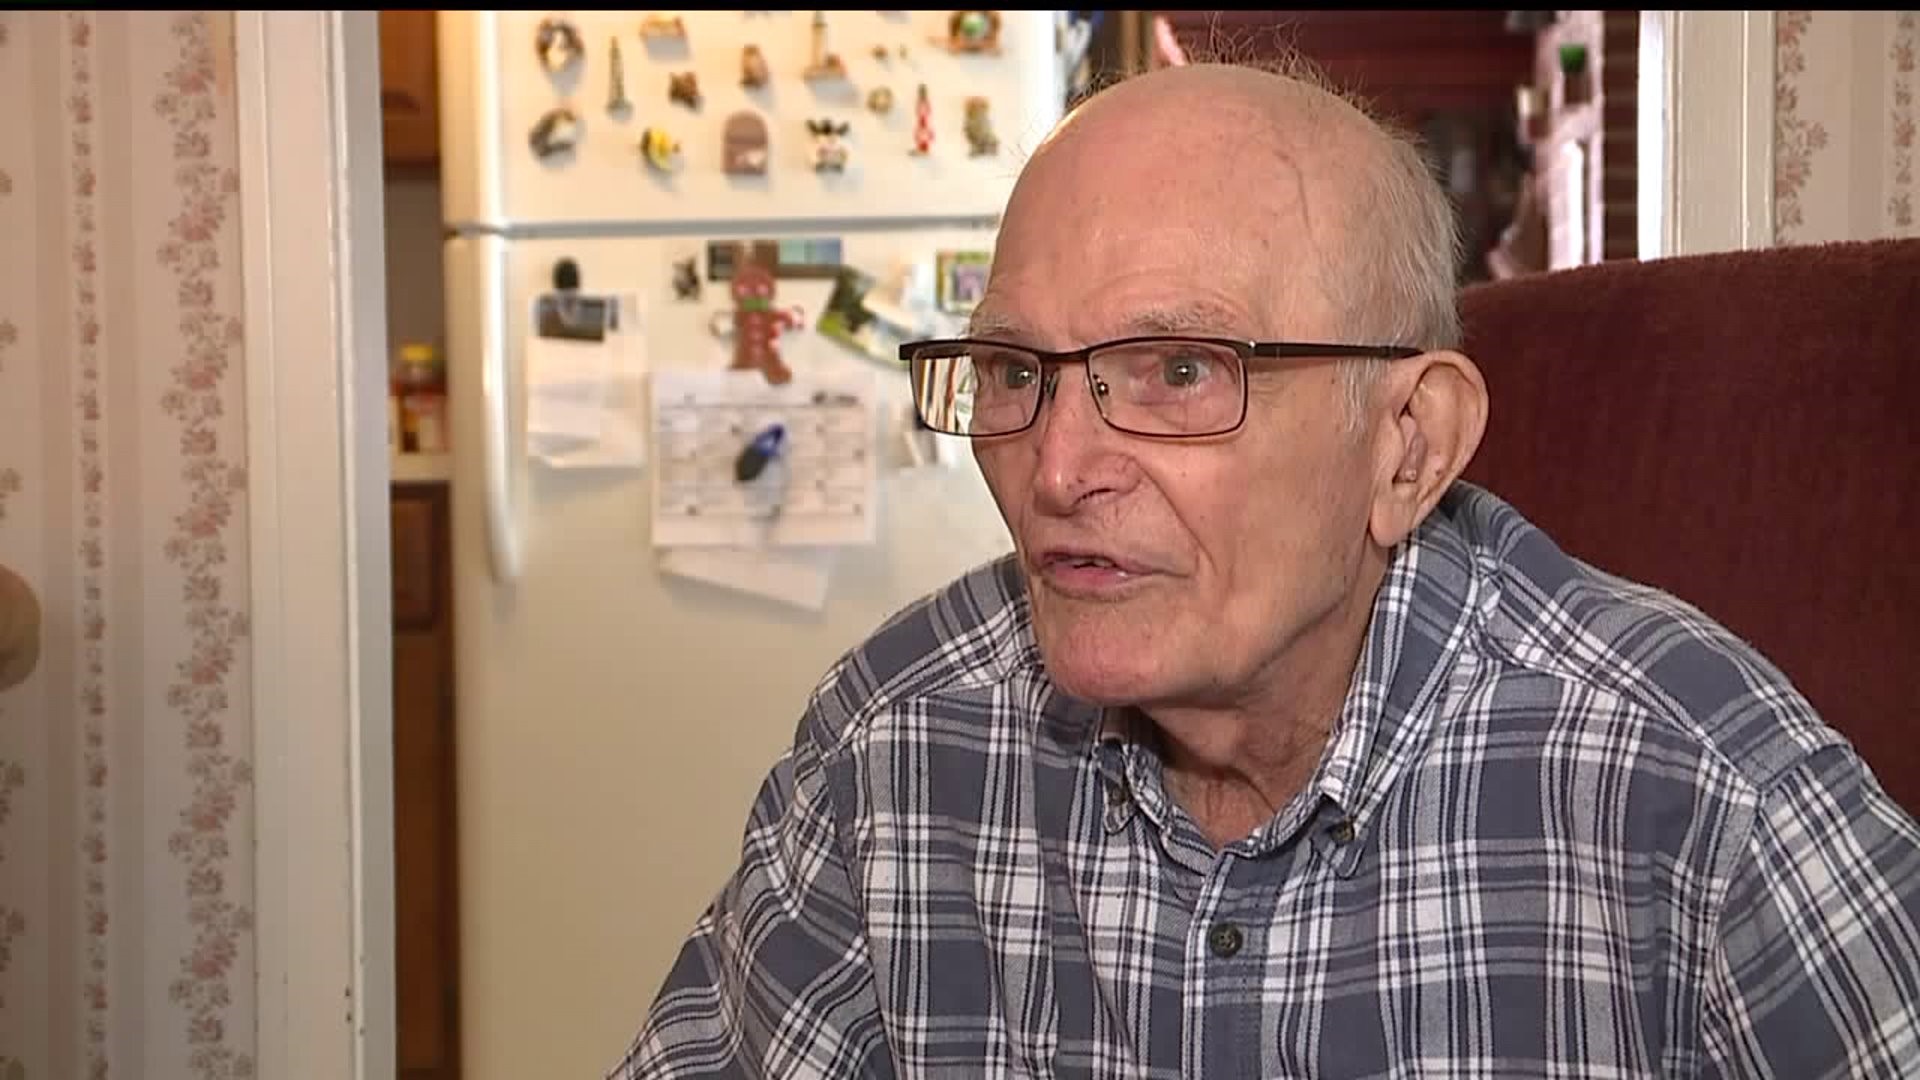 York County WWII Veteran looks back on D-Day